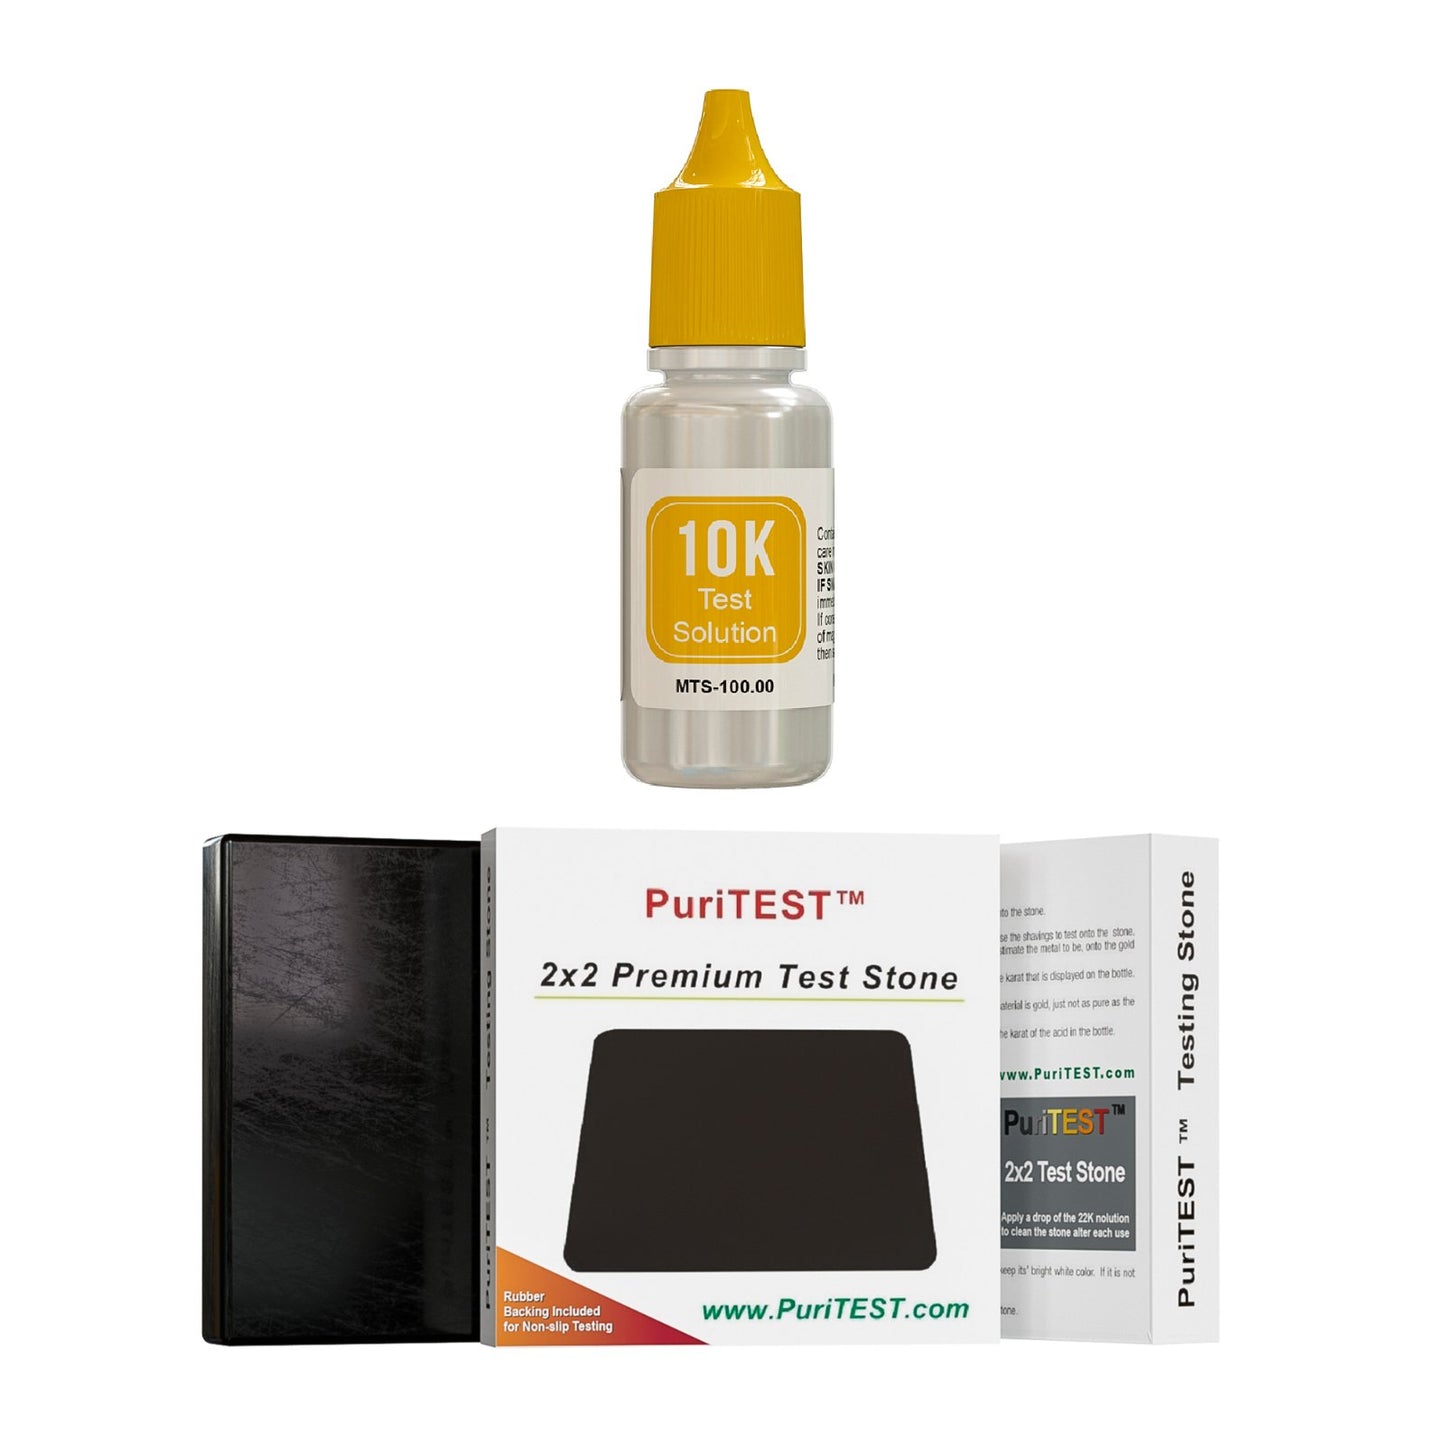 PuriTEST Gold Jewelry Testing Acid 10k 14k 18k Kit Tester N35 Earth Magnet Check Detect Precious Metals